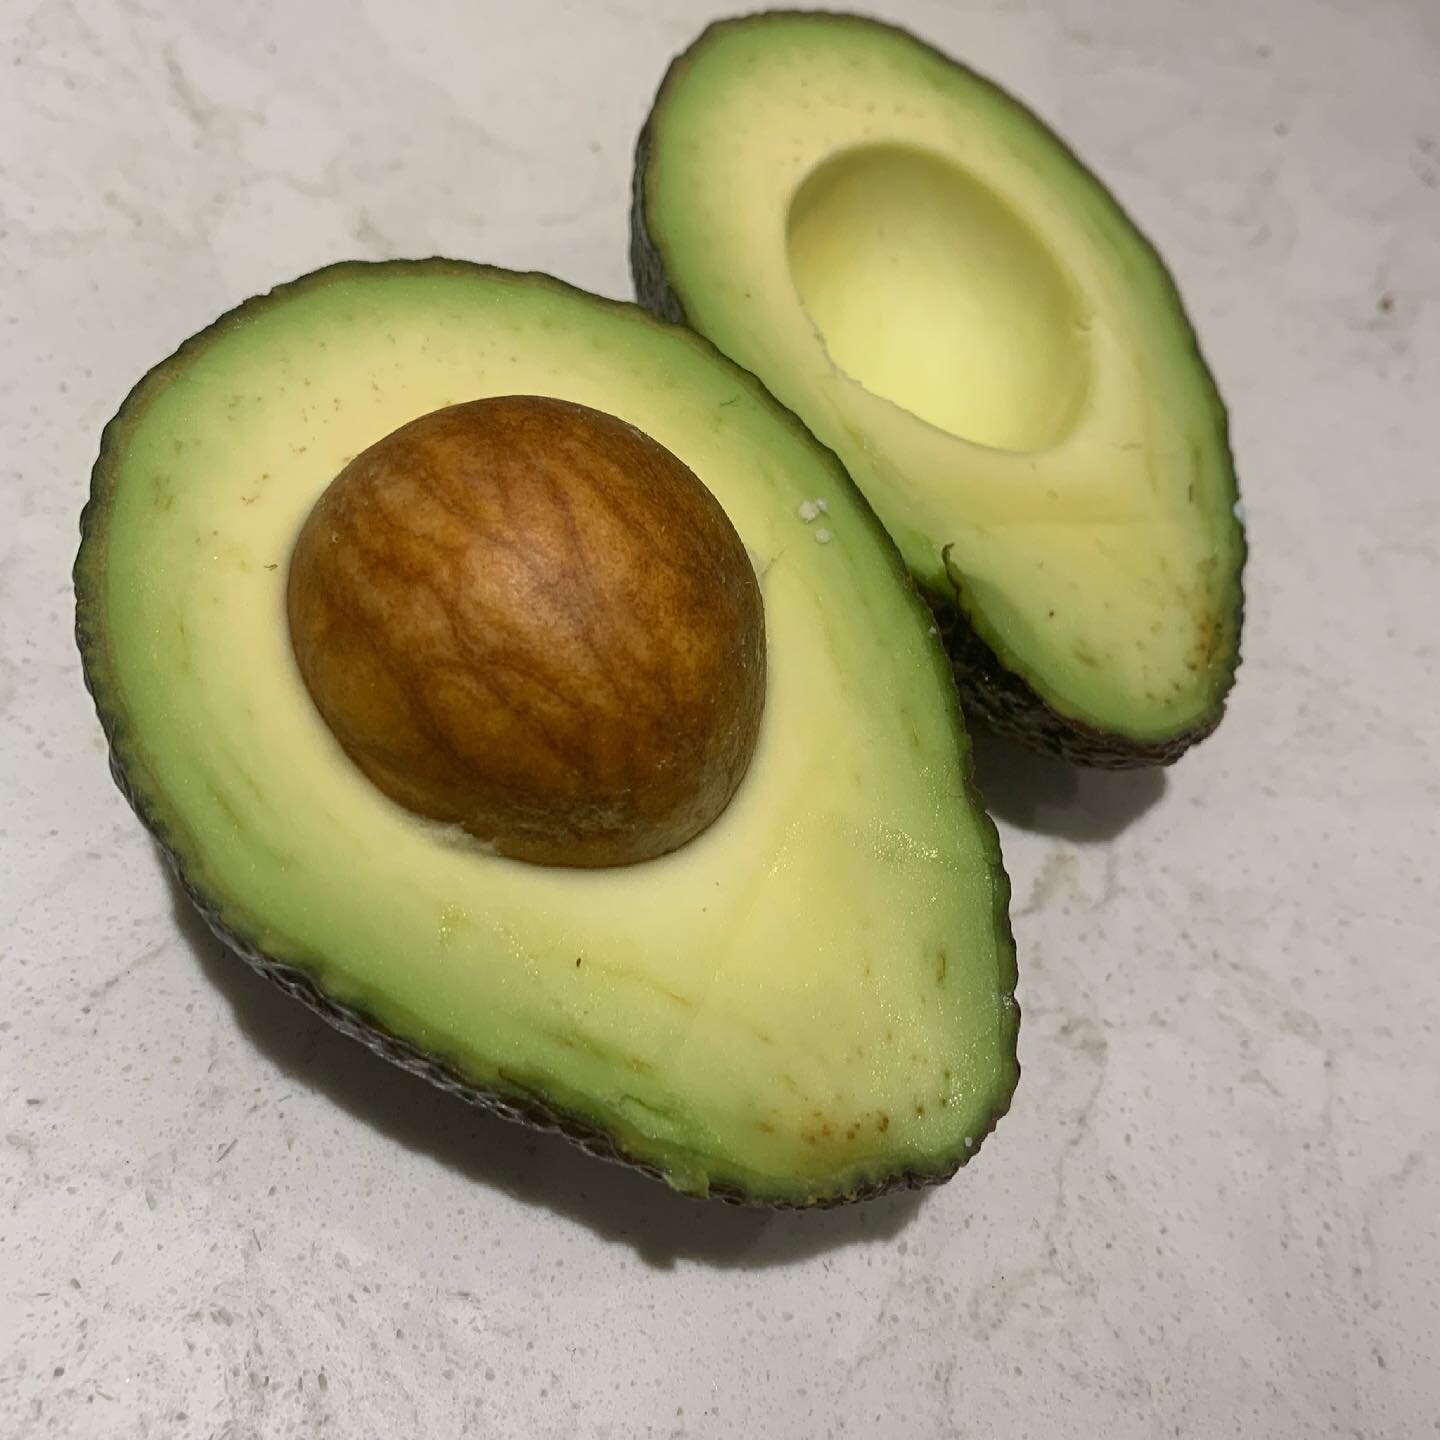 Perfection!  I couldn&rsquo;t not take a picture of this perfect looking fruit after slicing through it.
.

Avocado is one of the healthiest fruits in the world.
It is rich in healthy fats and fiber. According to research, avocado reduces absorption 